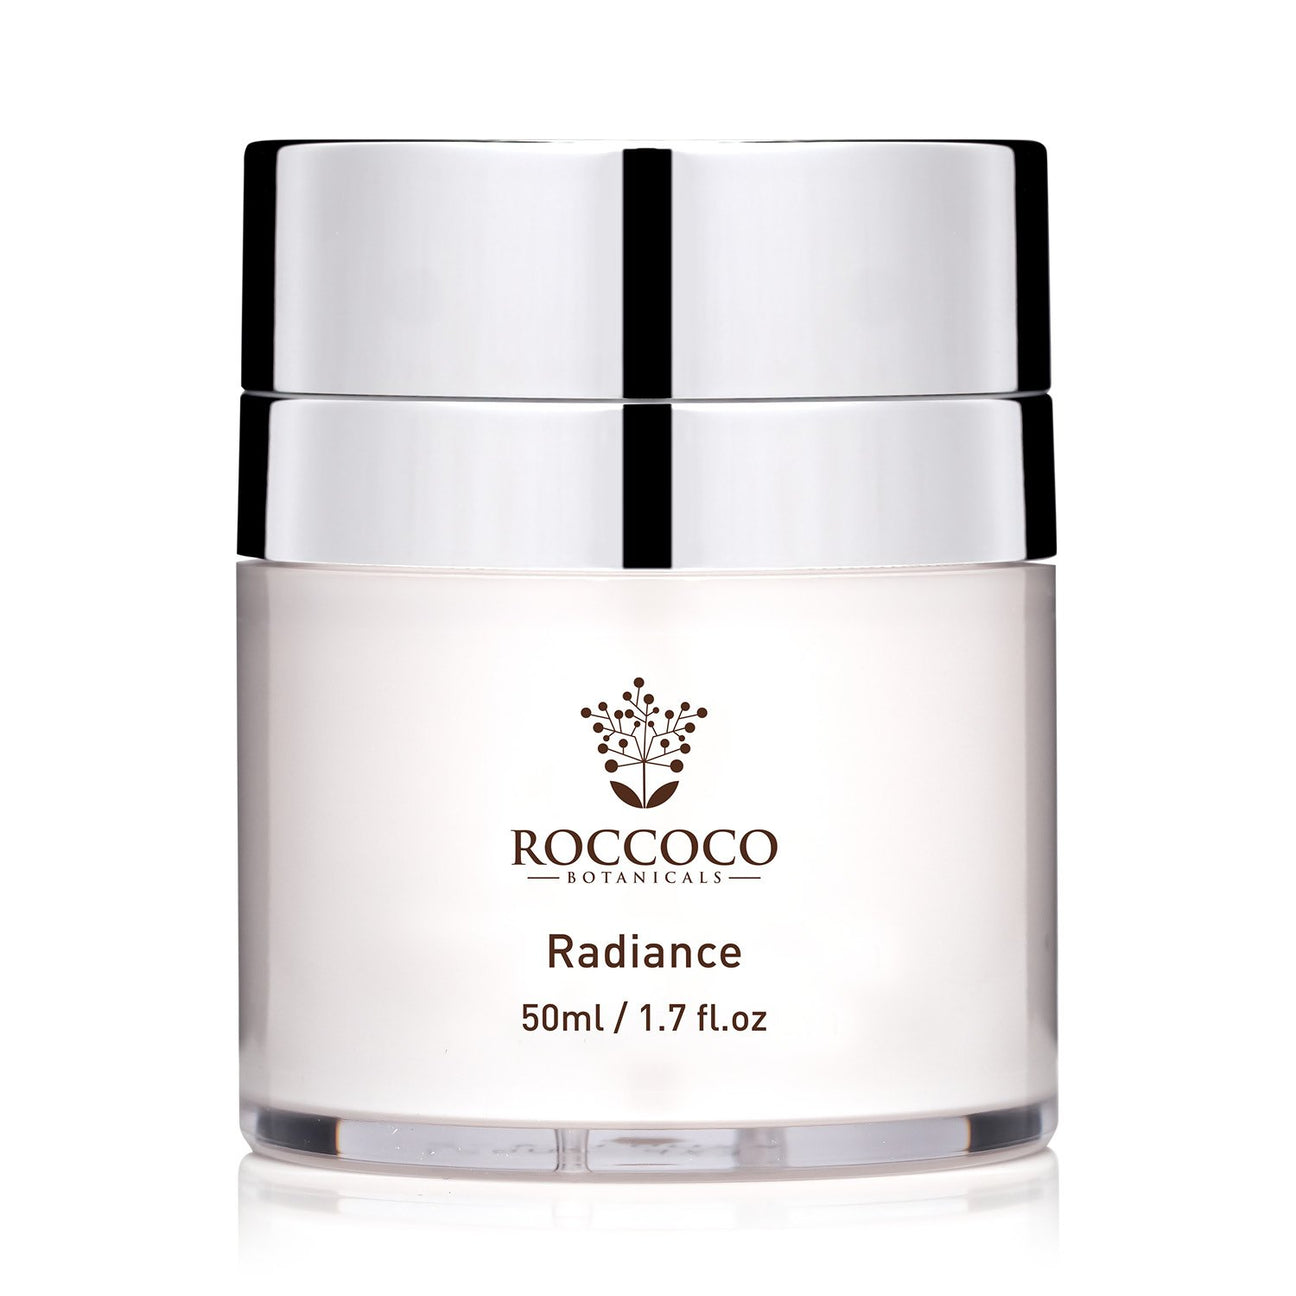 Roccoco Botanicals Radiance - Click to Buy